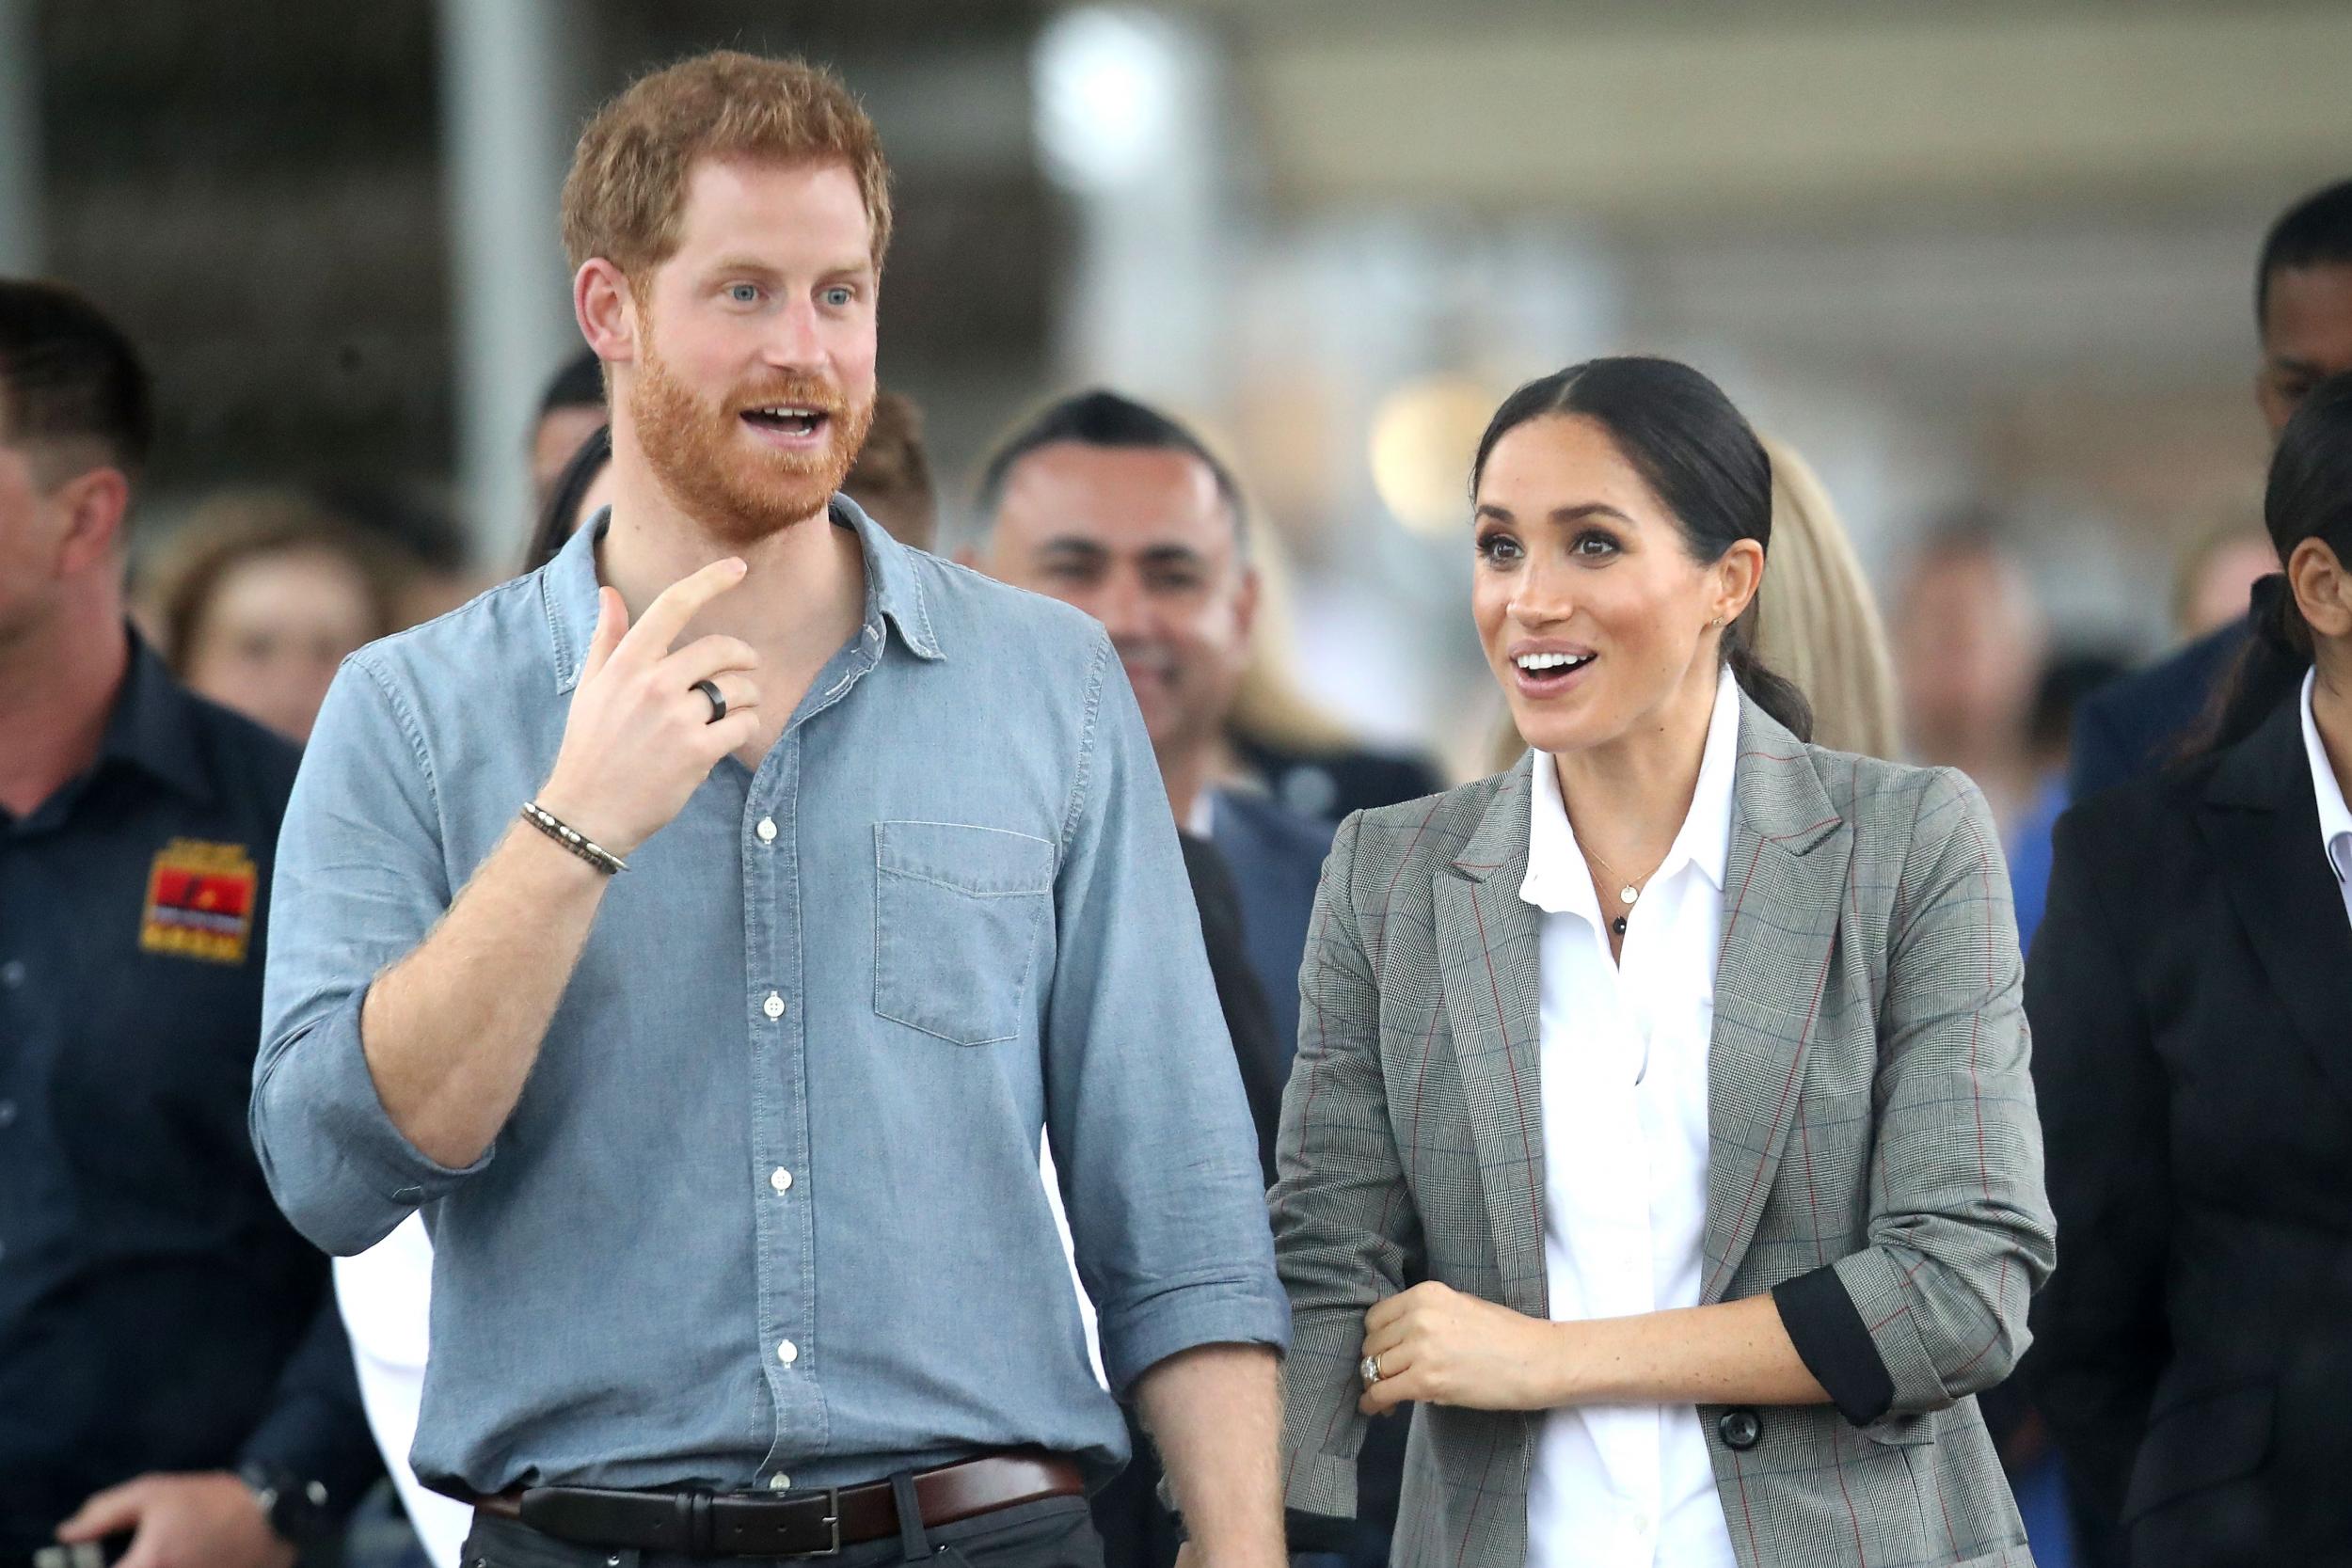 The Duchess of Sussex wearing a Serena blazer while in Australia with Prince Harry